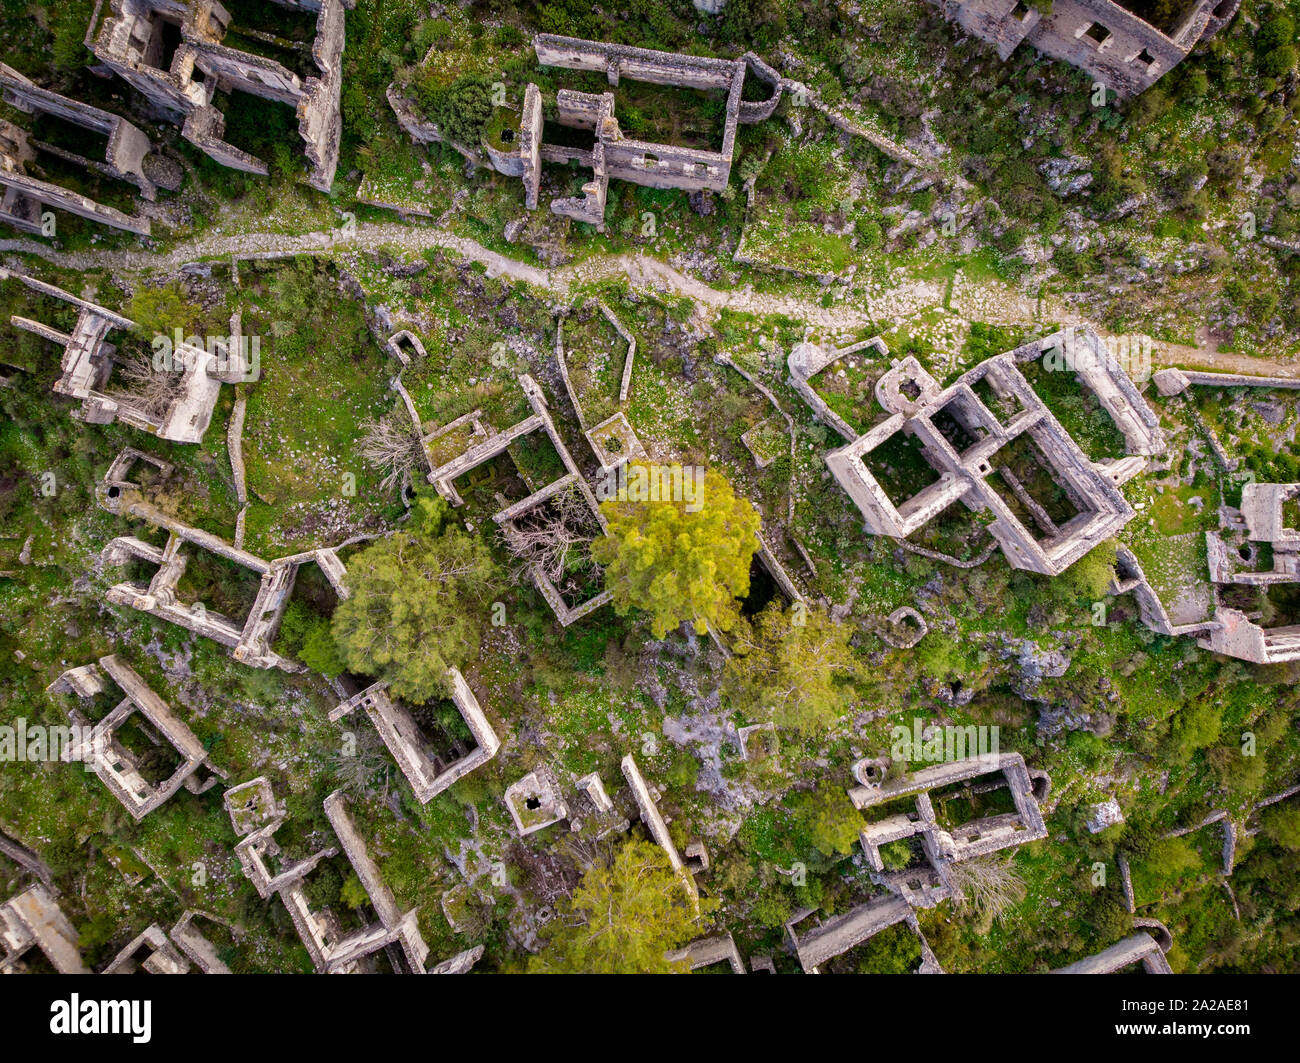 Aerial view over abandoned town looking straight down onto the ruins Stock Photo